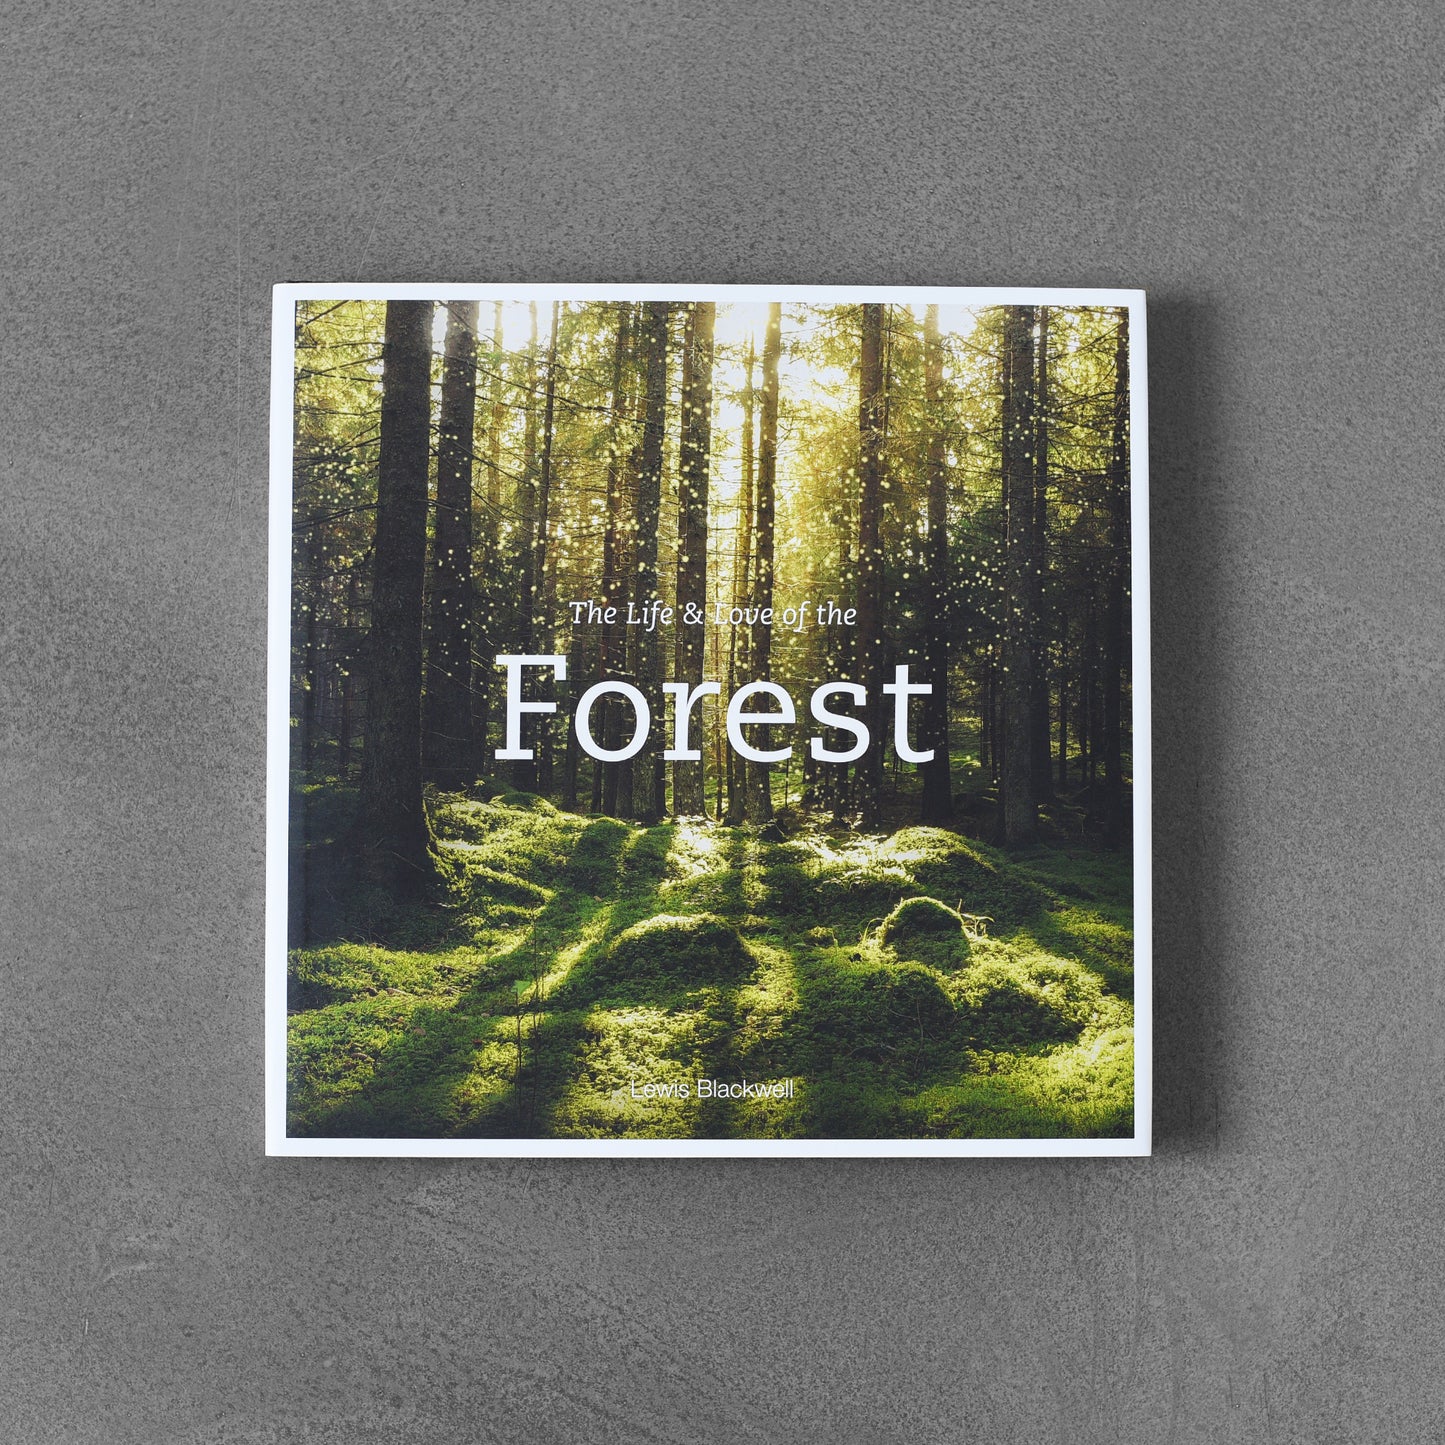 The Life & Love of the Forest - Lewis Blackwell